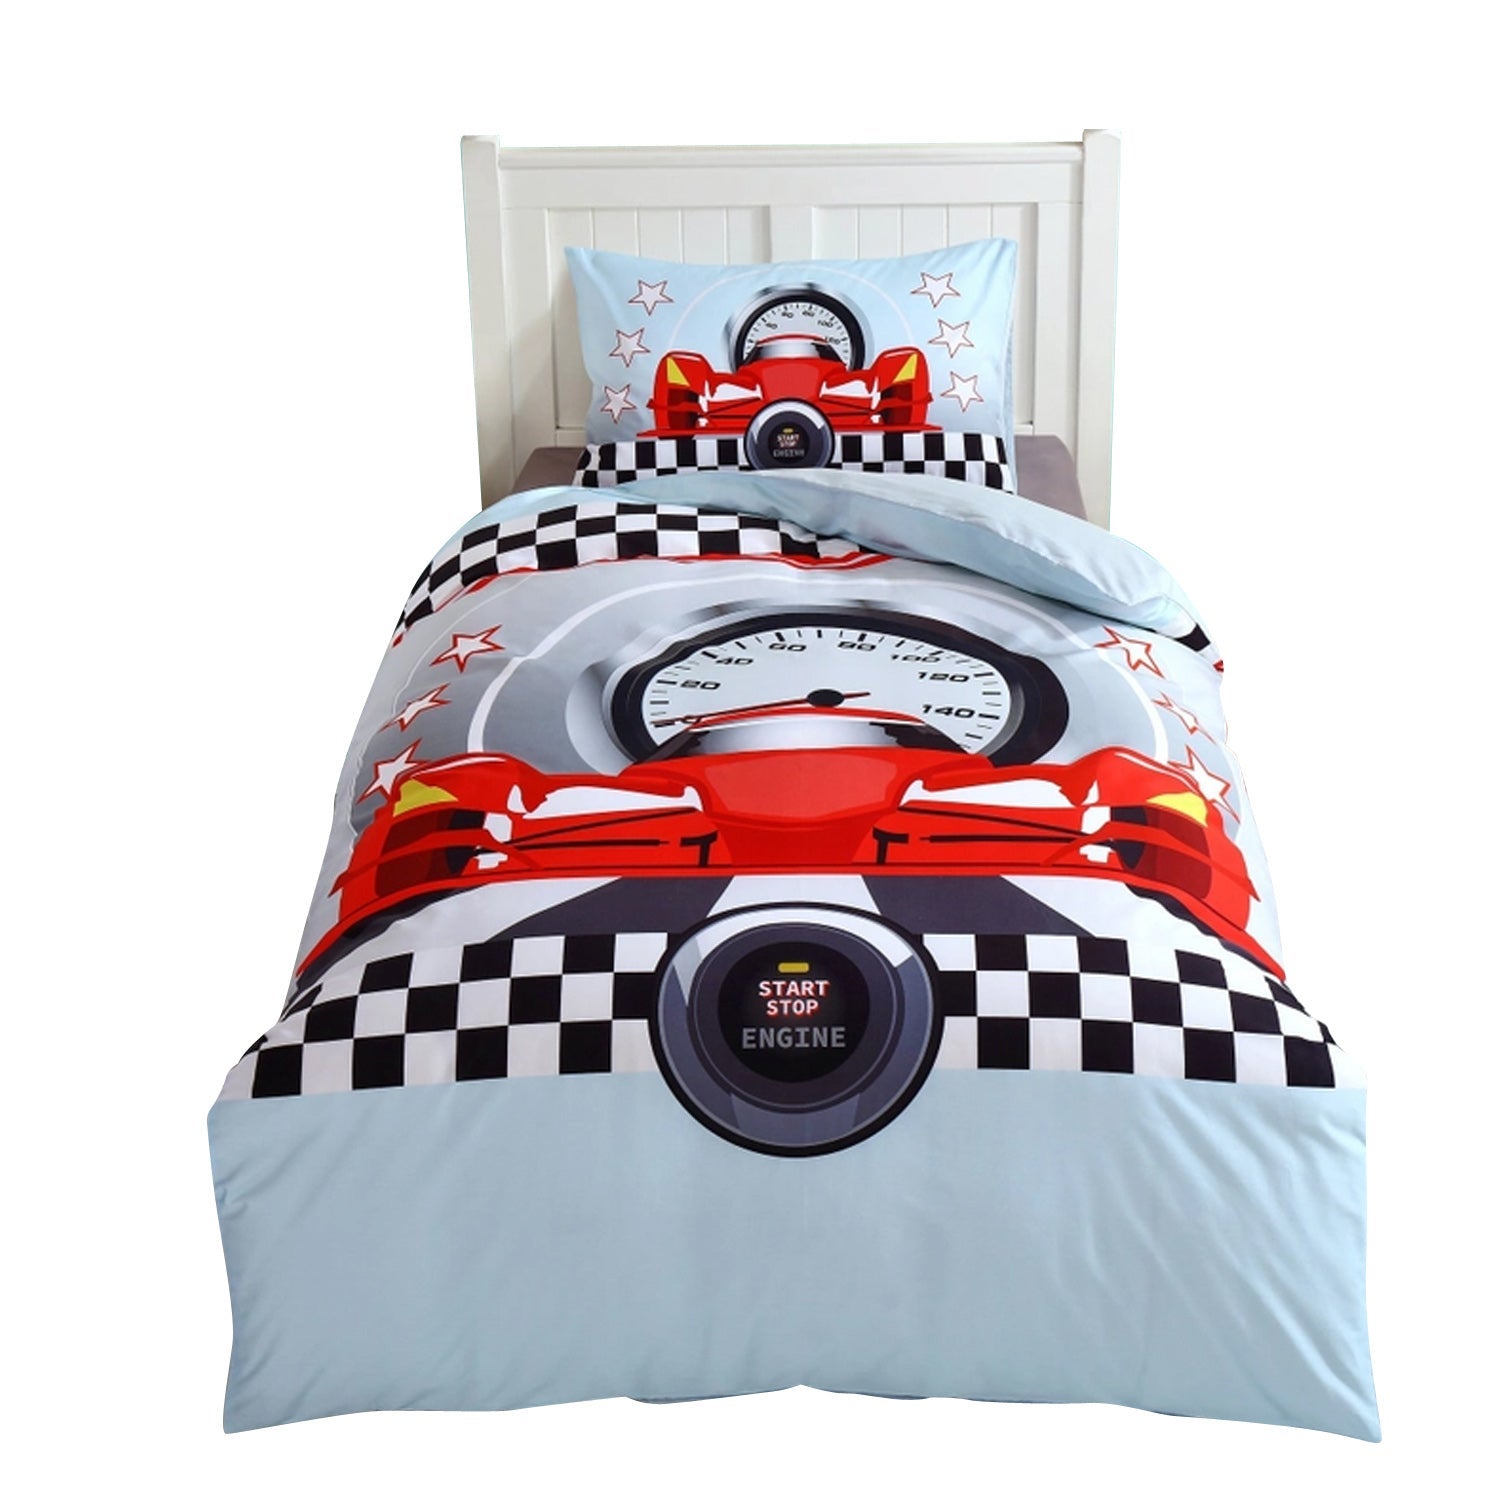 Single Size Kids Cotton Bedding Quilt Cover with Pillow Case - Gametime